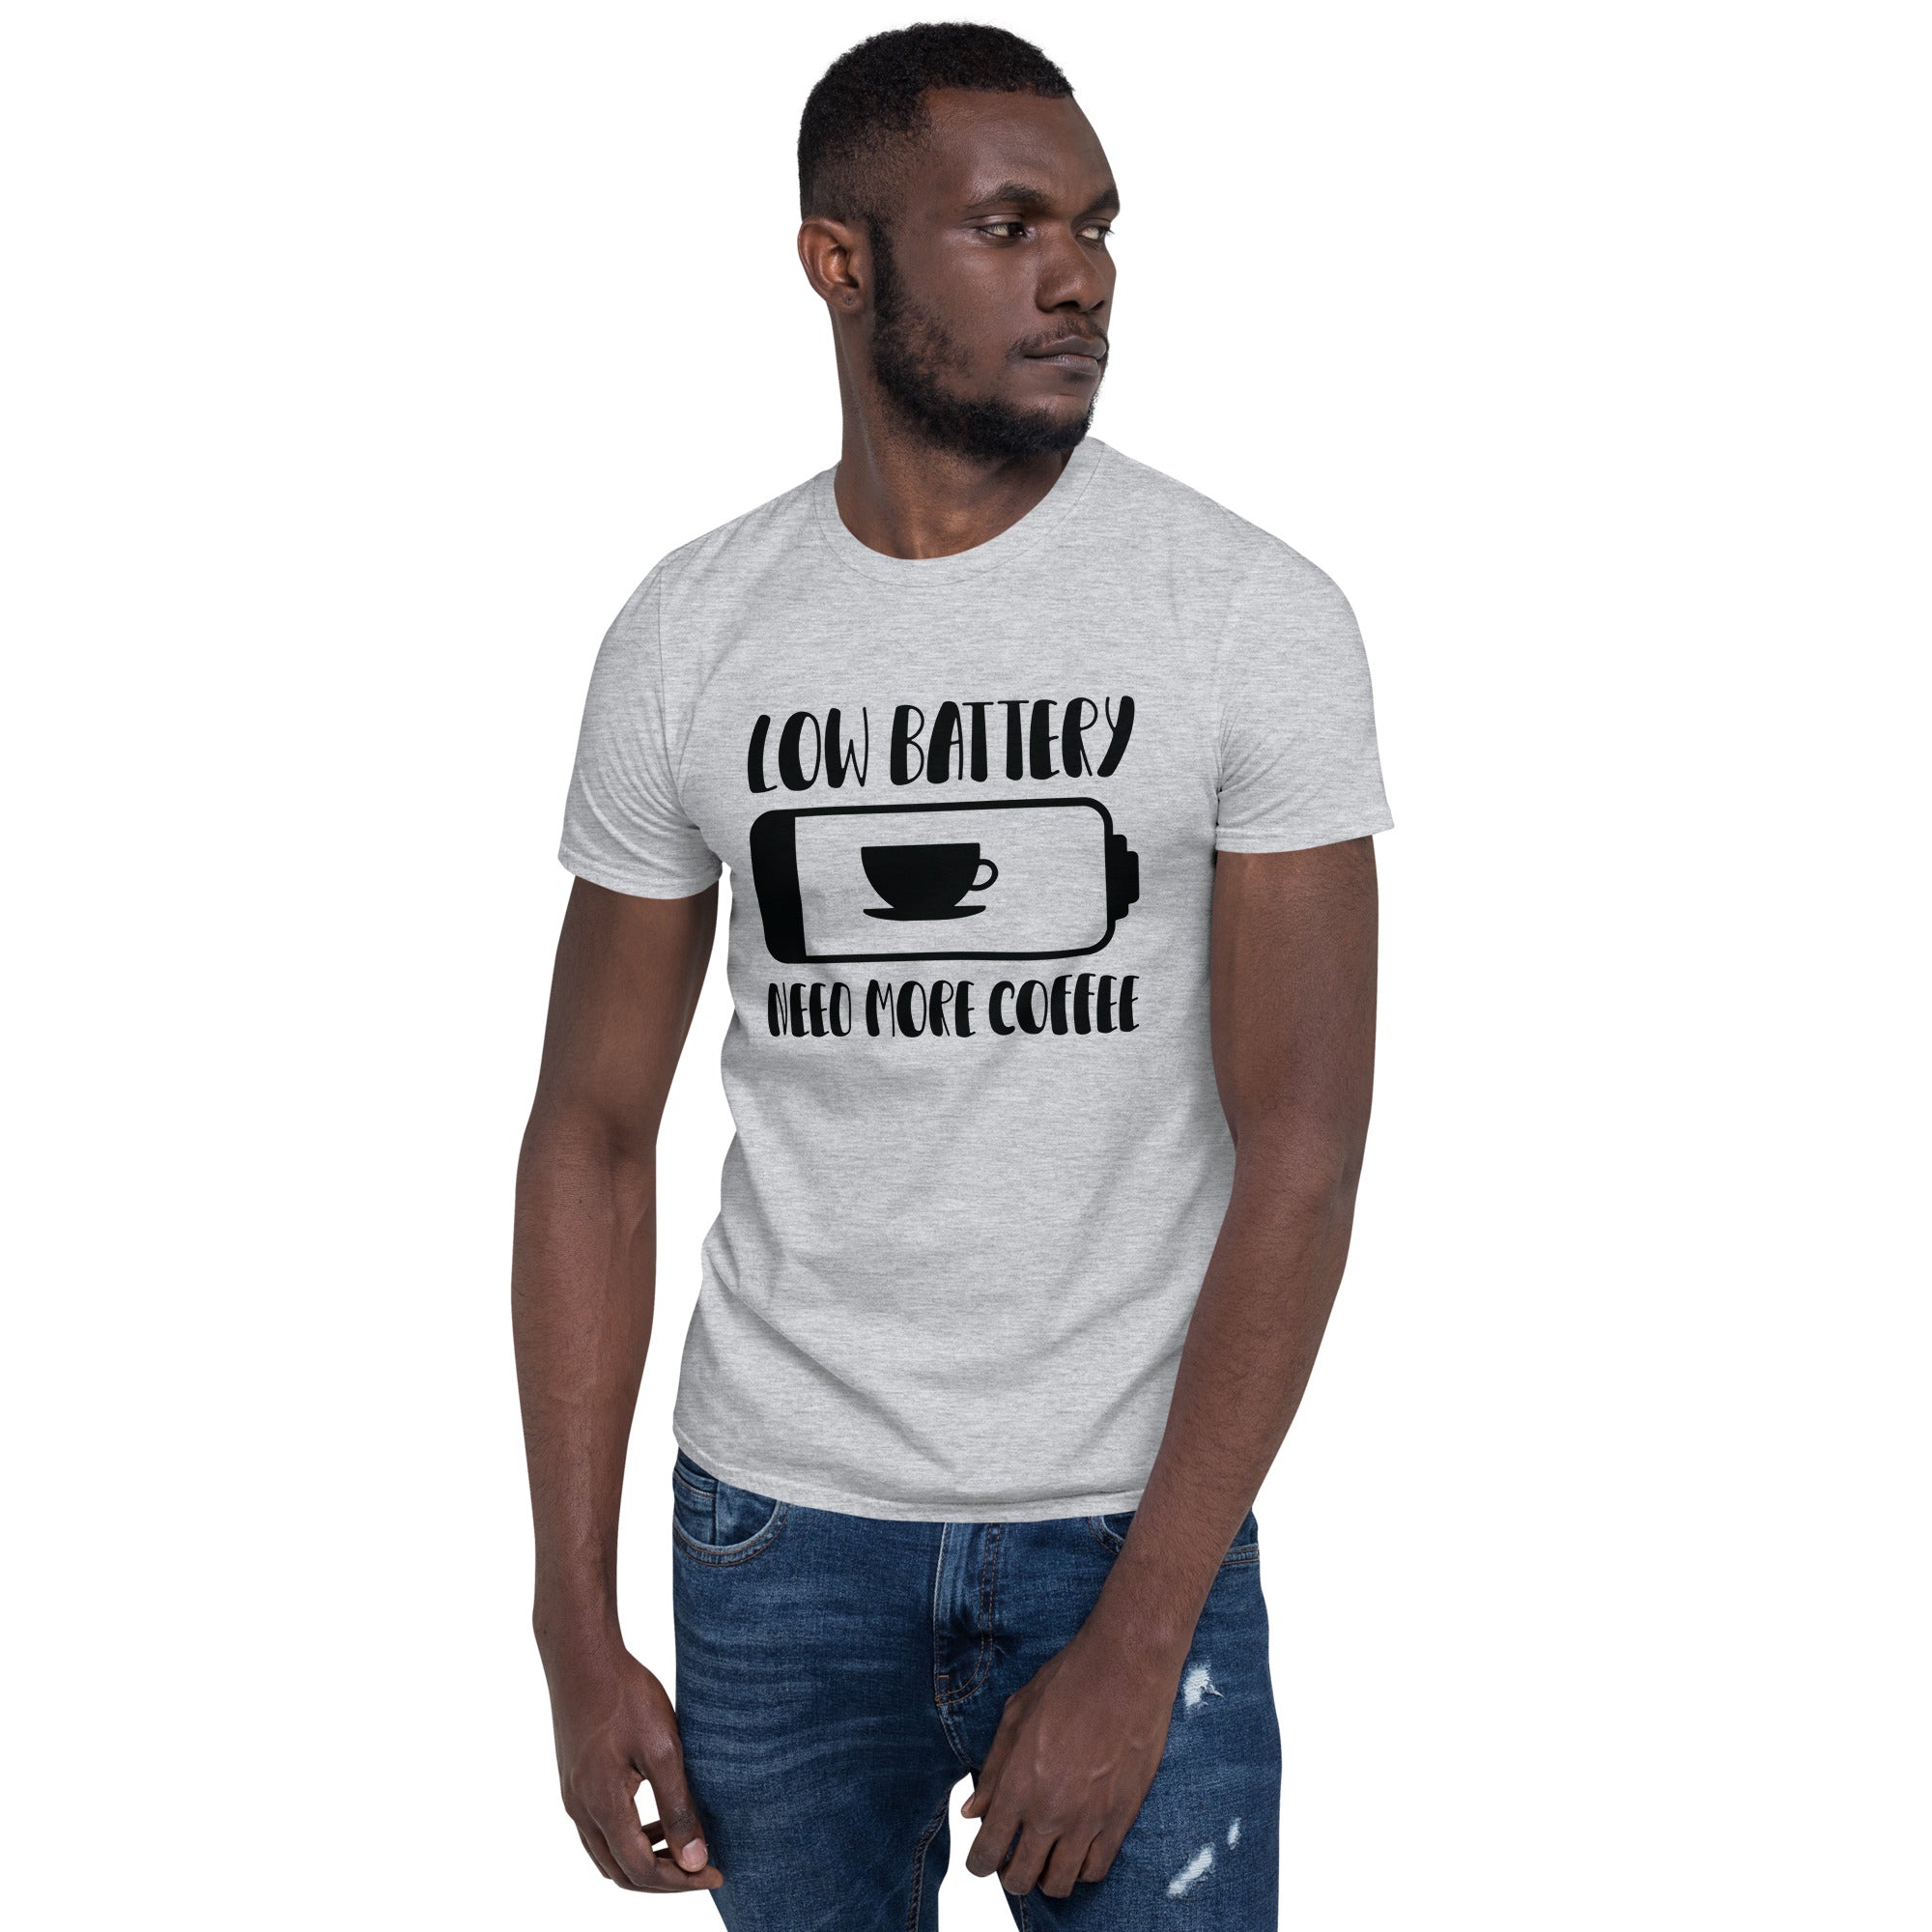 Low Battery Need More Coffee - Short-Sleeve Unisex T-Shirt